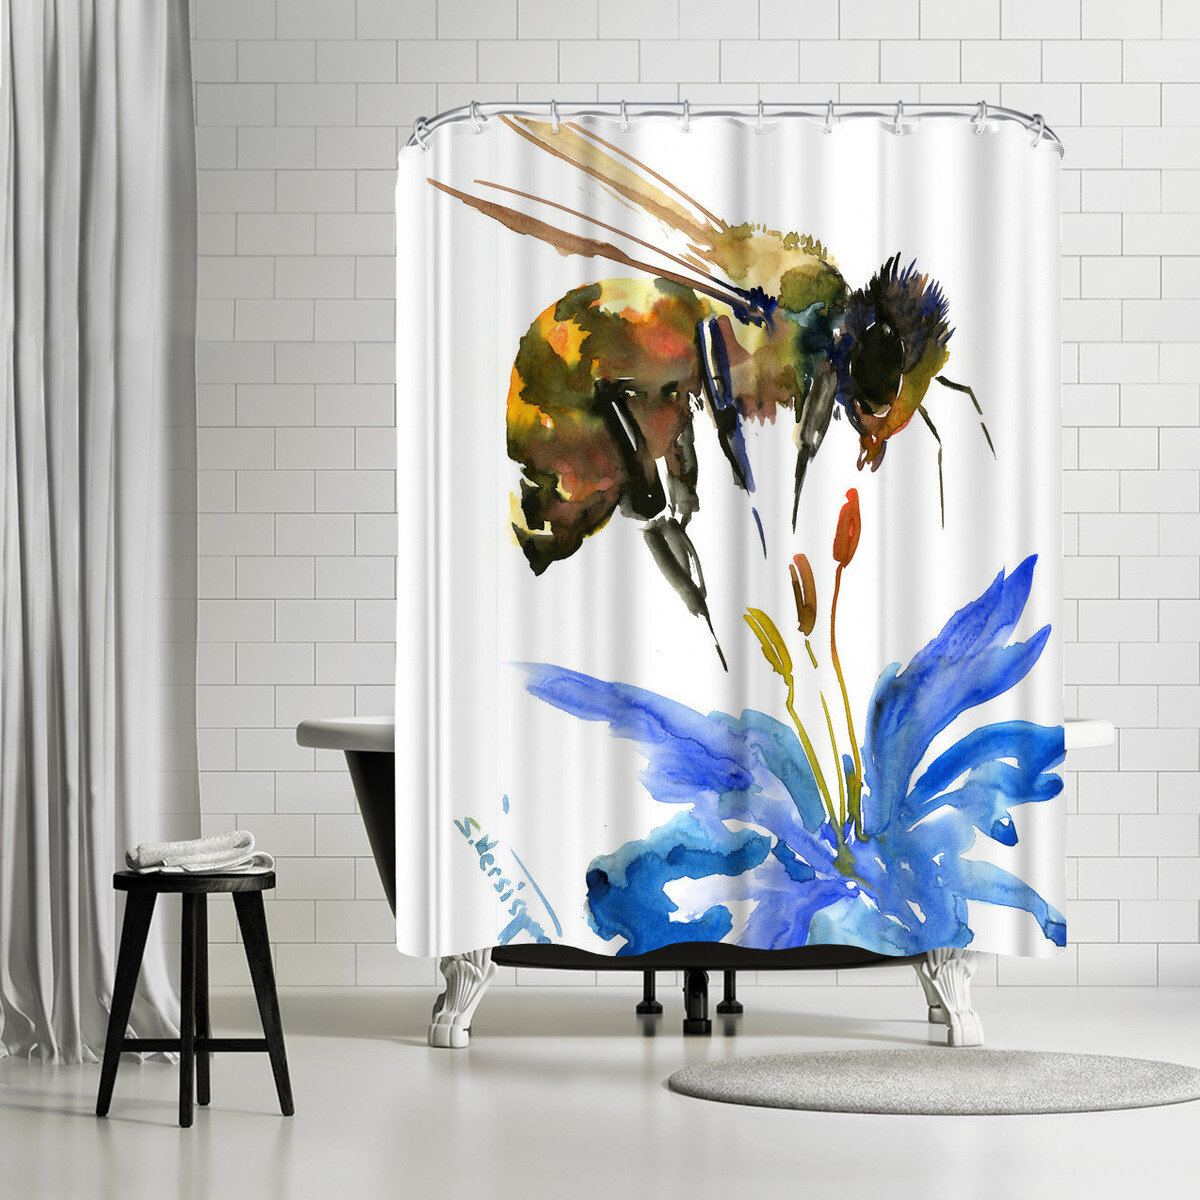 East Urban Home Suren Nersisyan Bumblebees and Flowers Single Shower Curtain